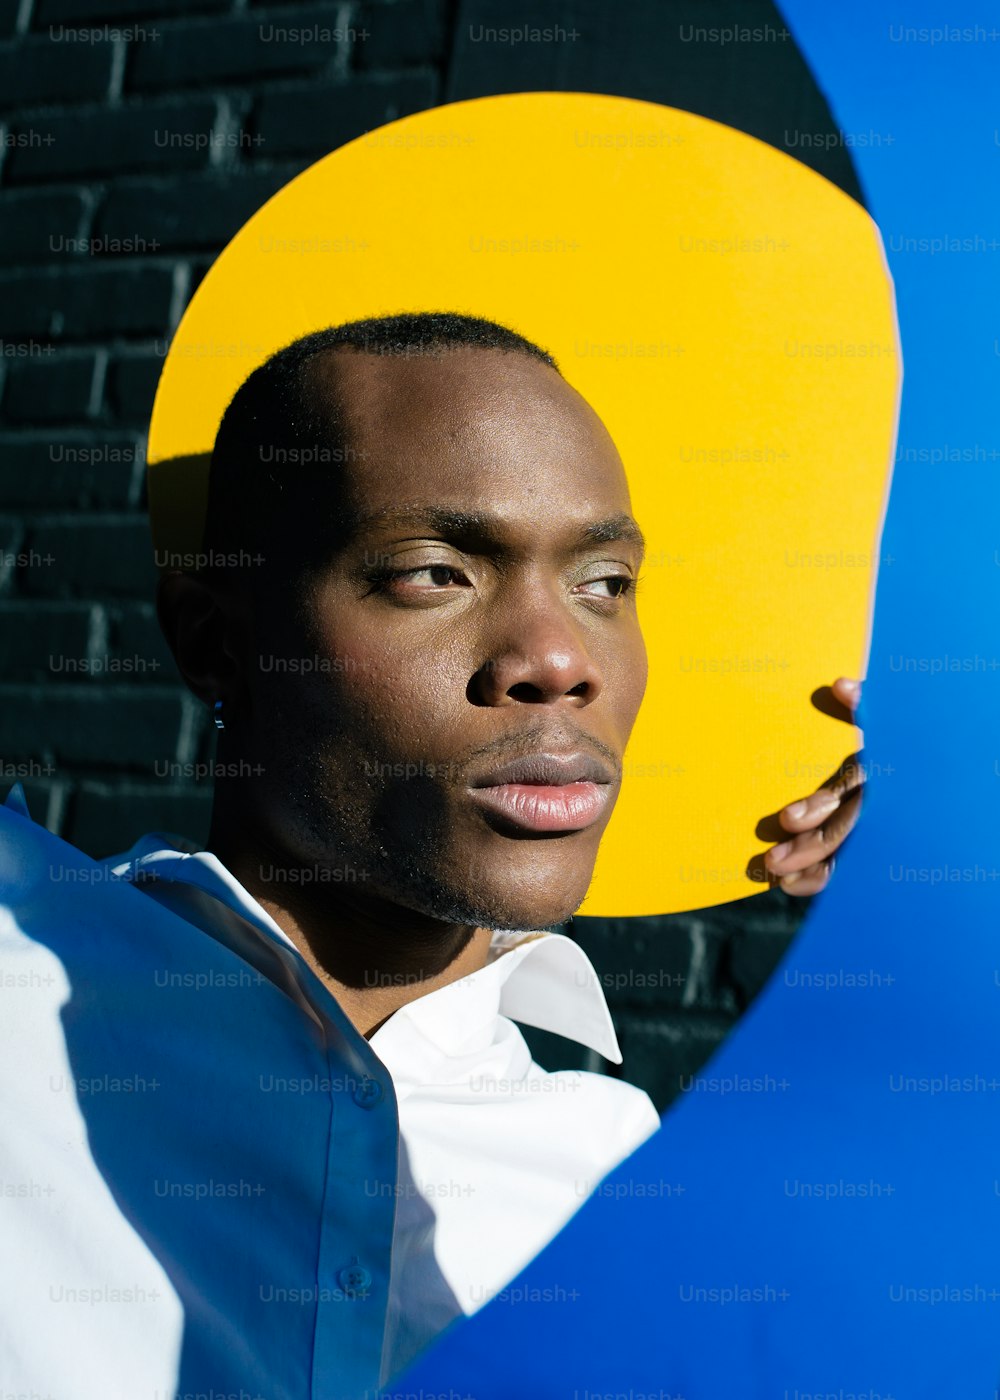 a man holding a large yellow and blue object